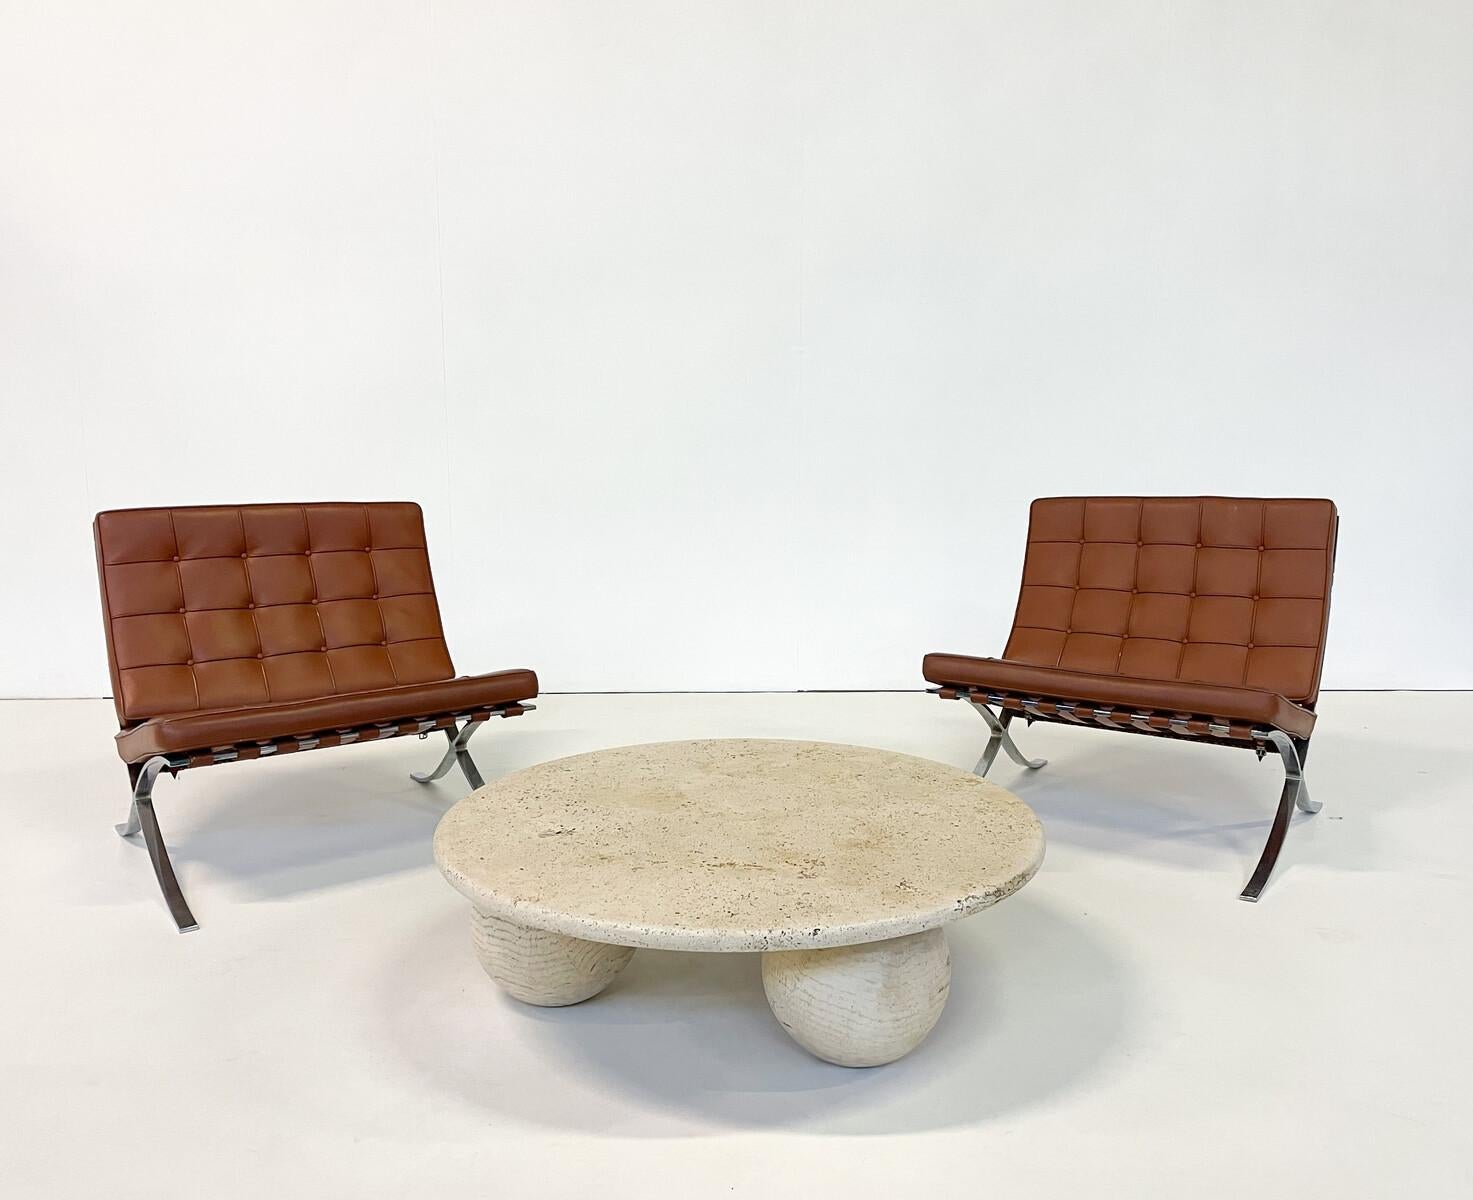 Pair of brown leather barcelona chairs by Mies Van Der Rohe for Knoll.